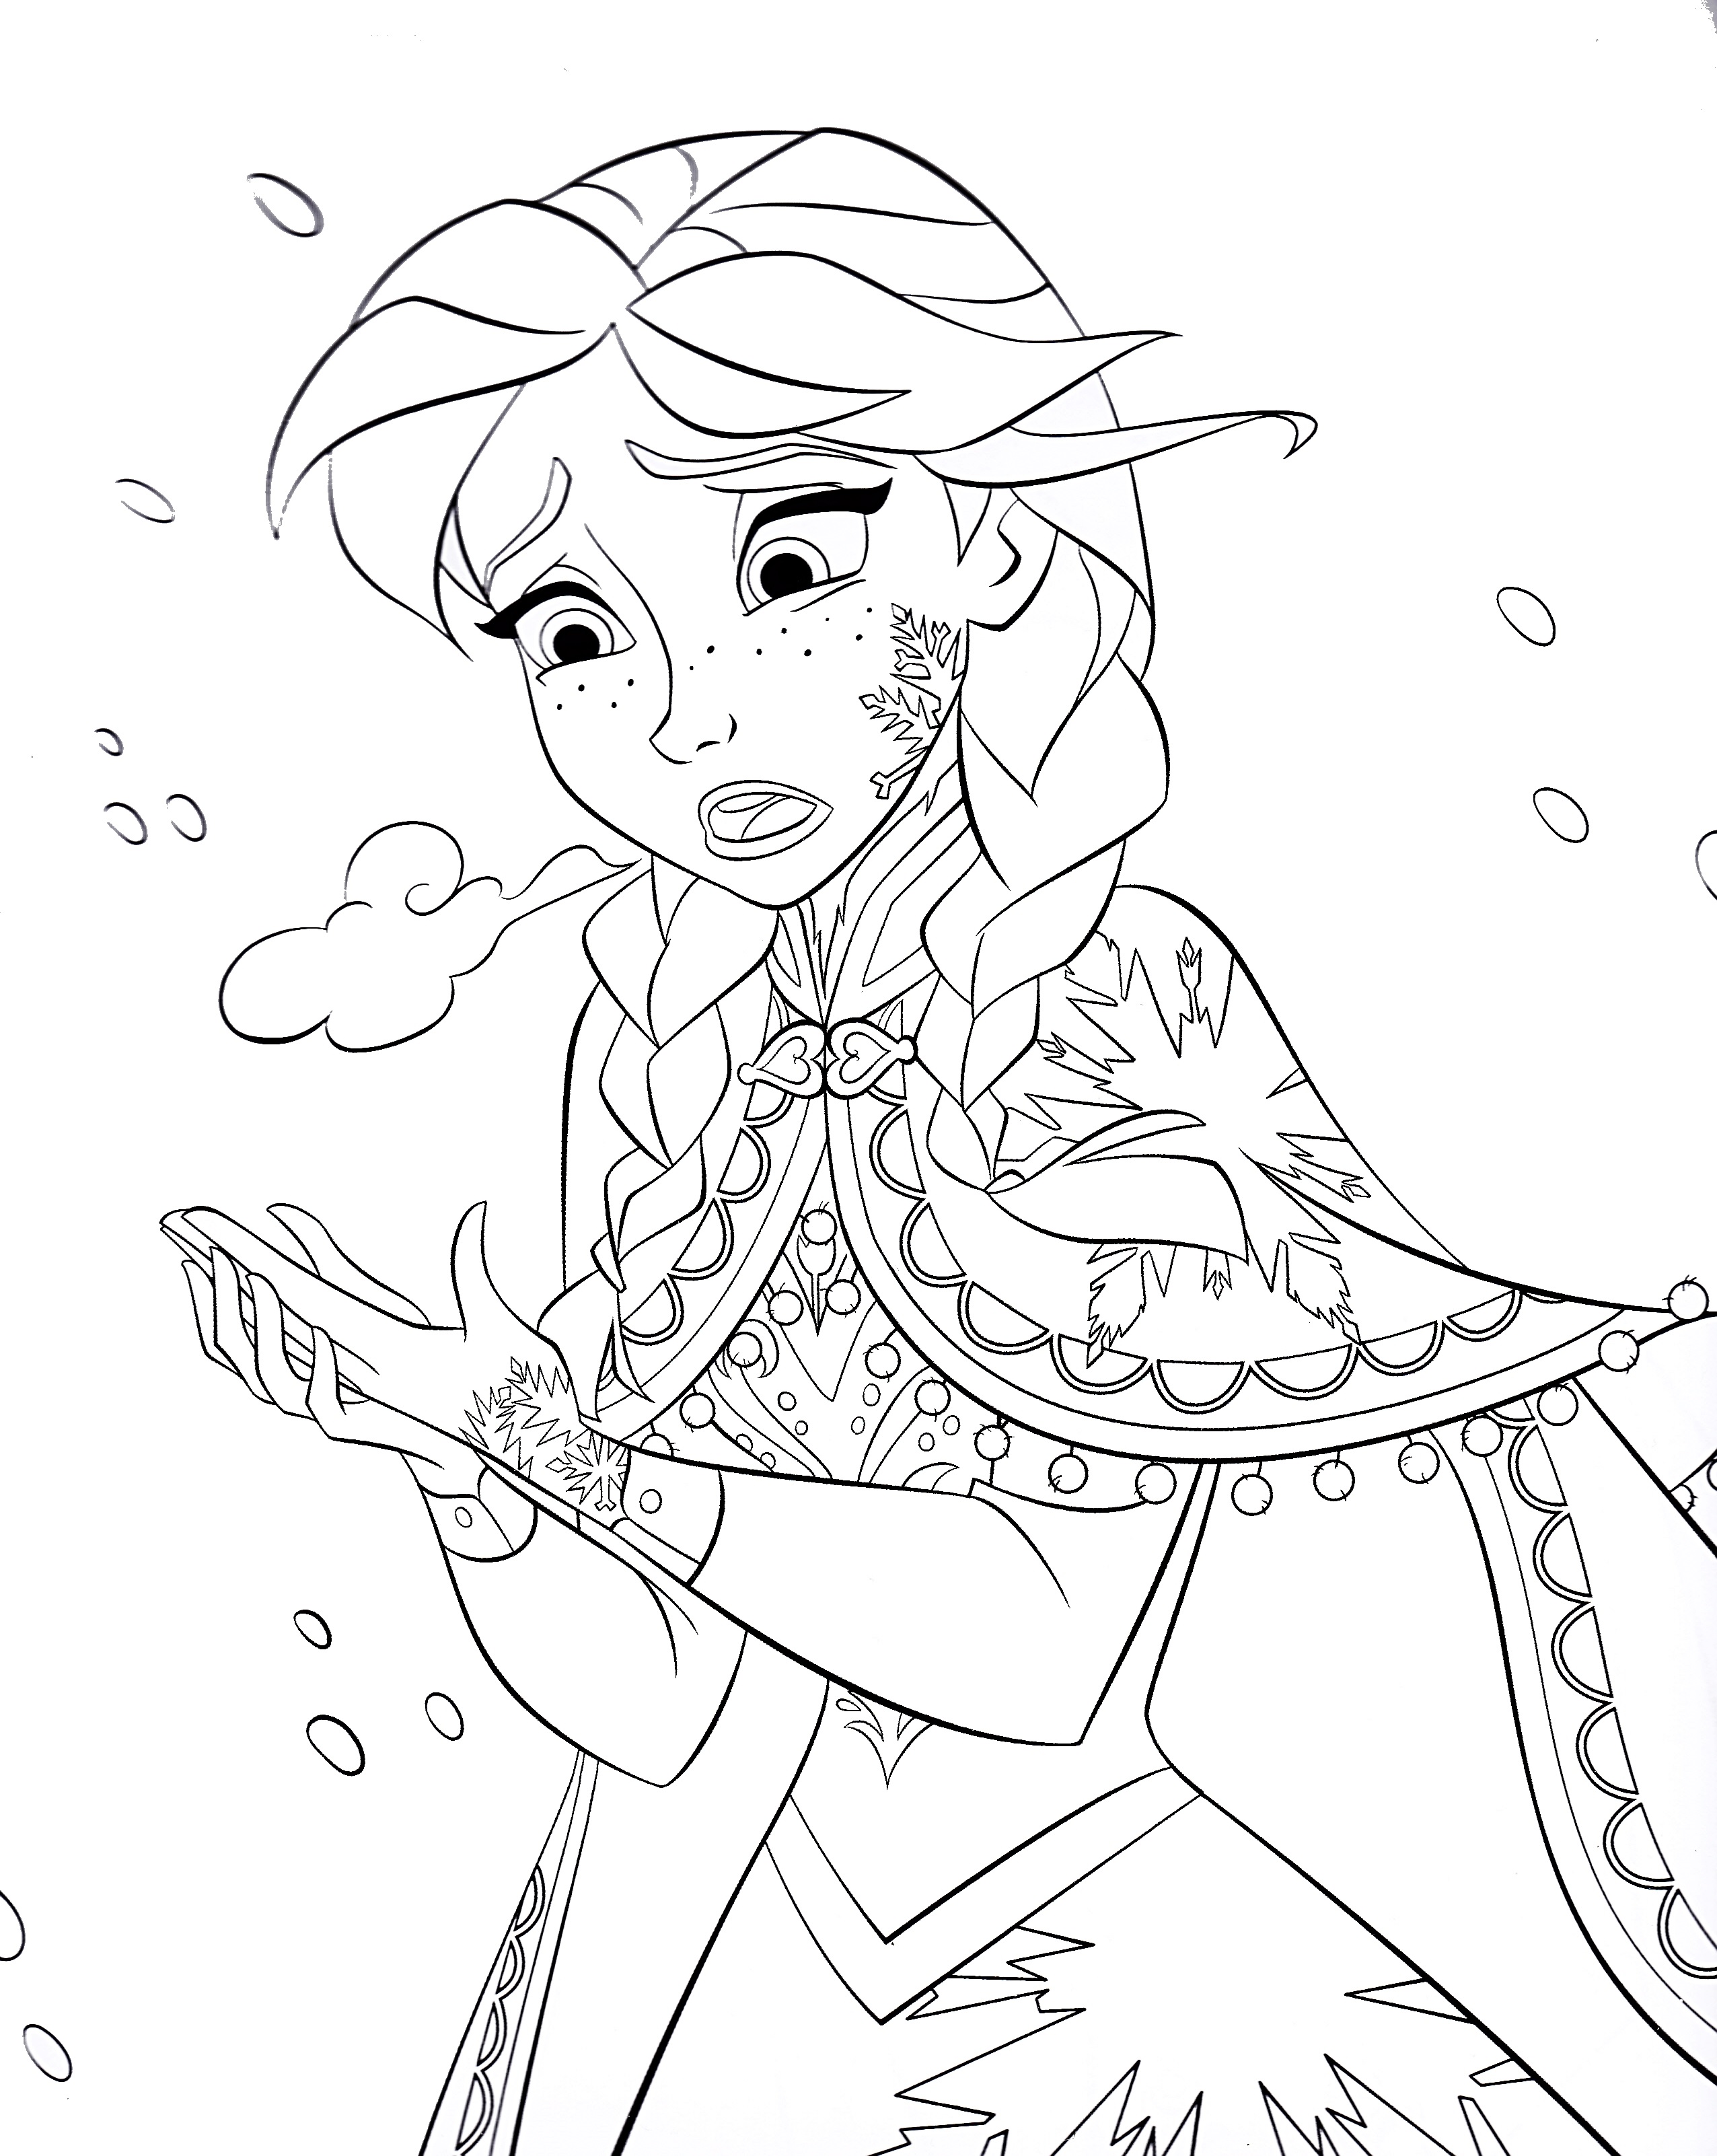 Disney Characters Images Coloring Coloring Pages